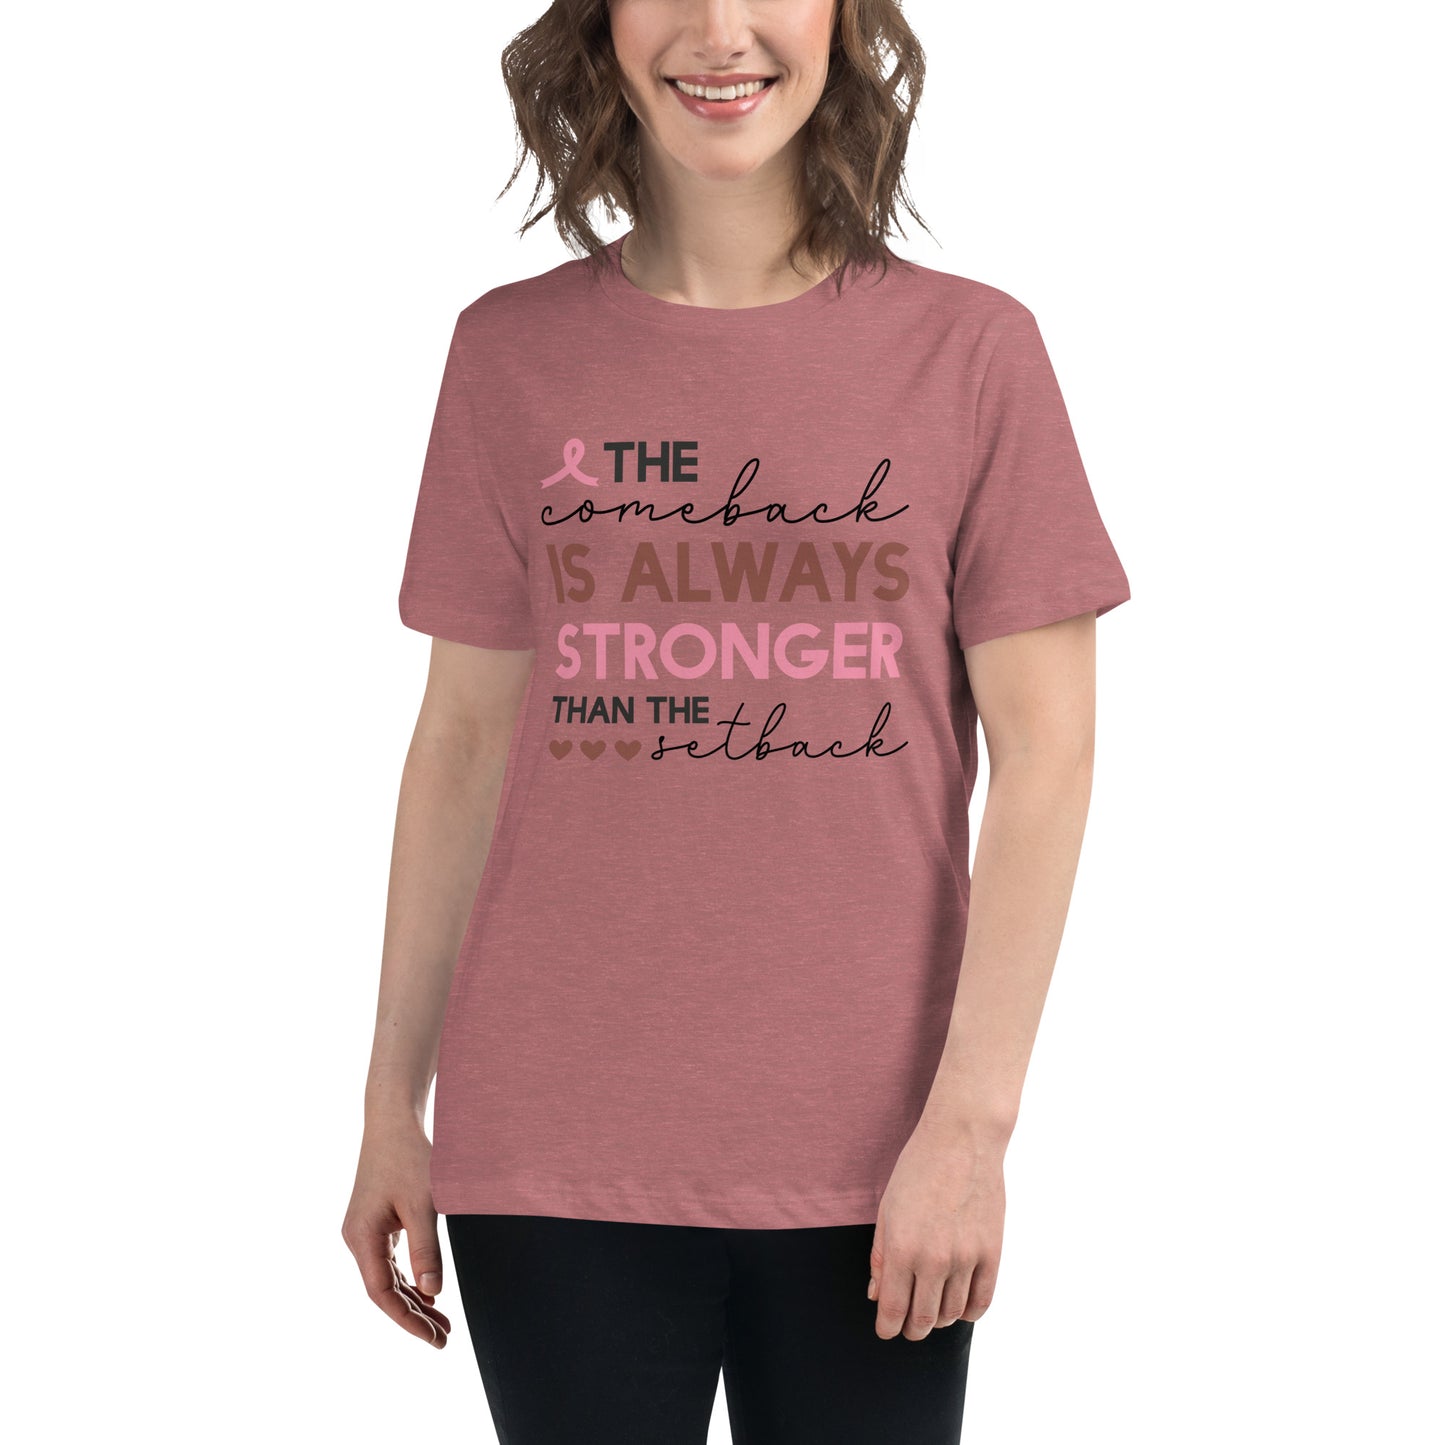 The Comeback is Always Stronger Breast Cancer Awareness Women's Relaxed T-Shirt Tee Tshirt